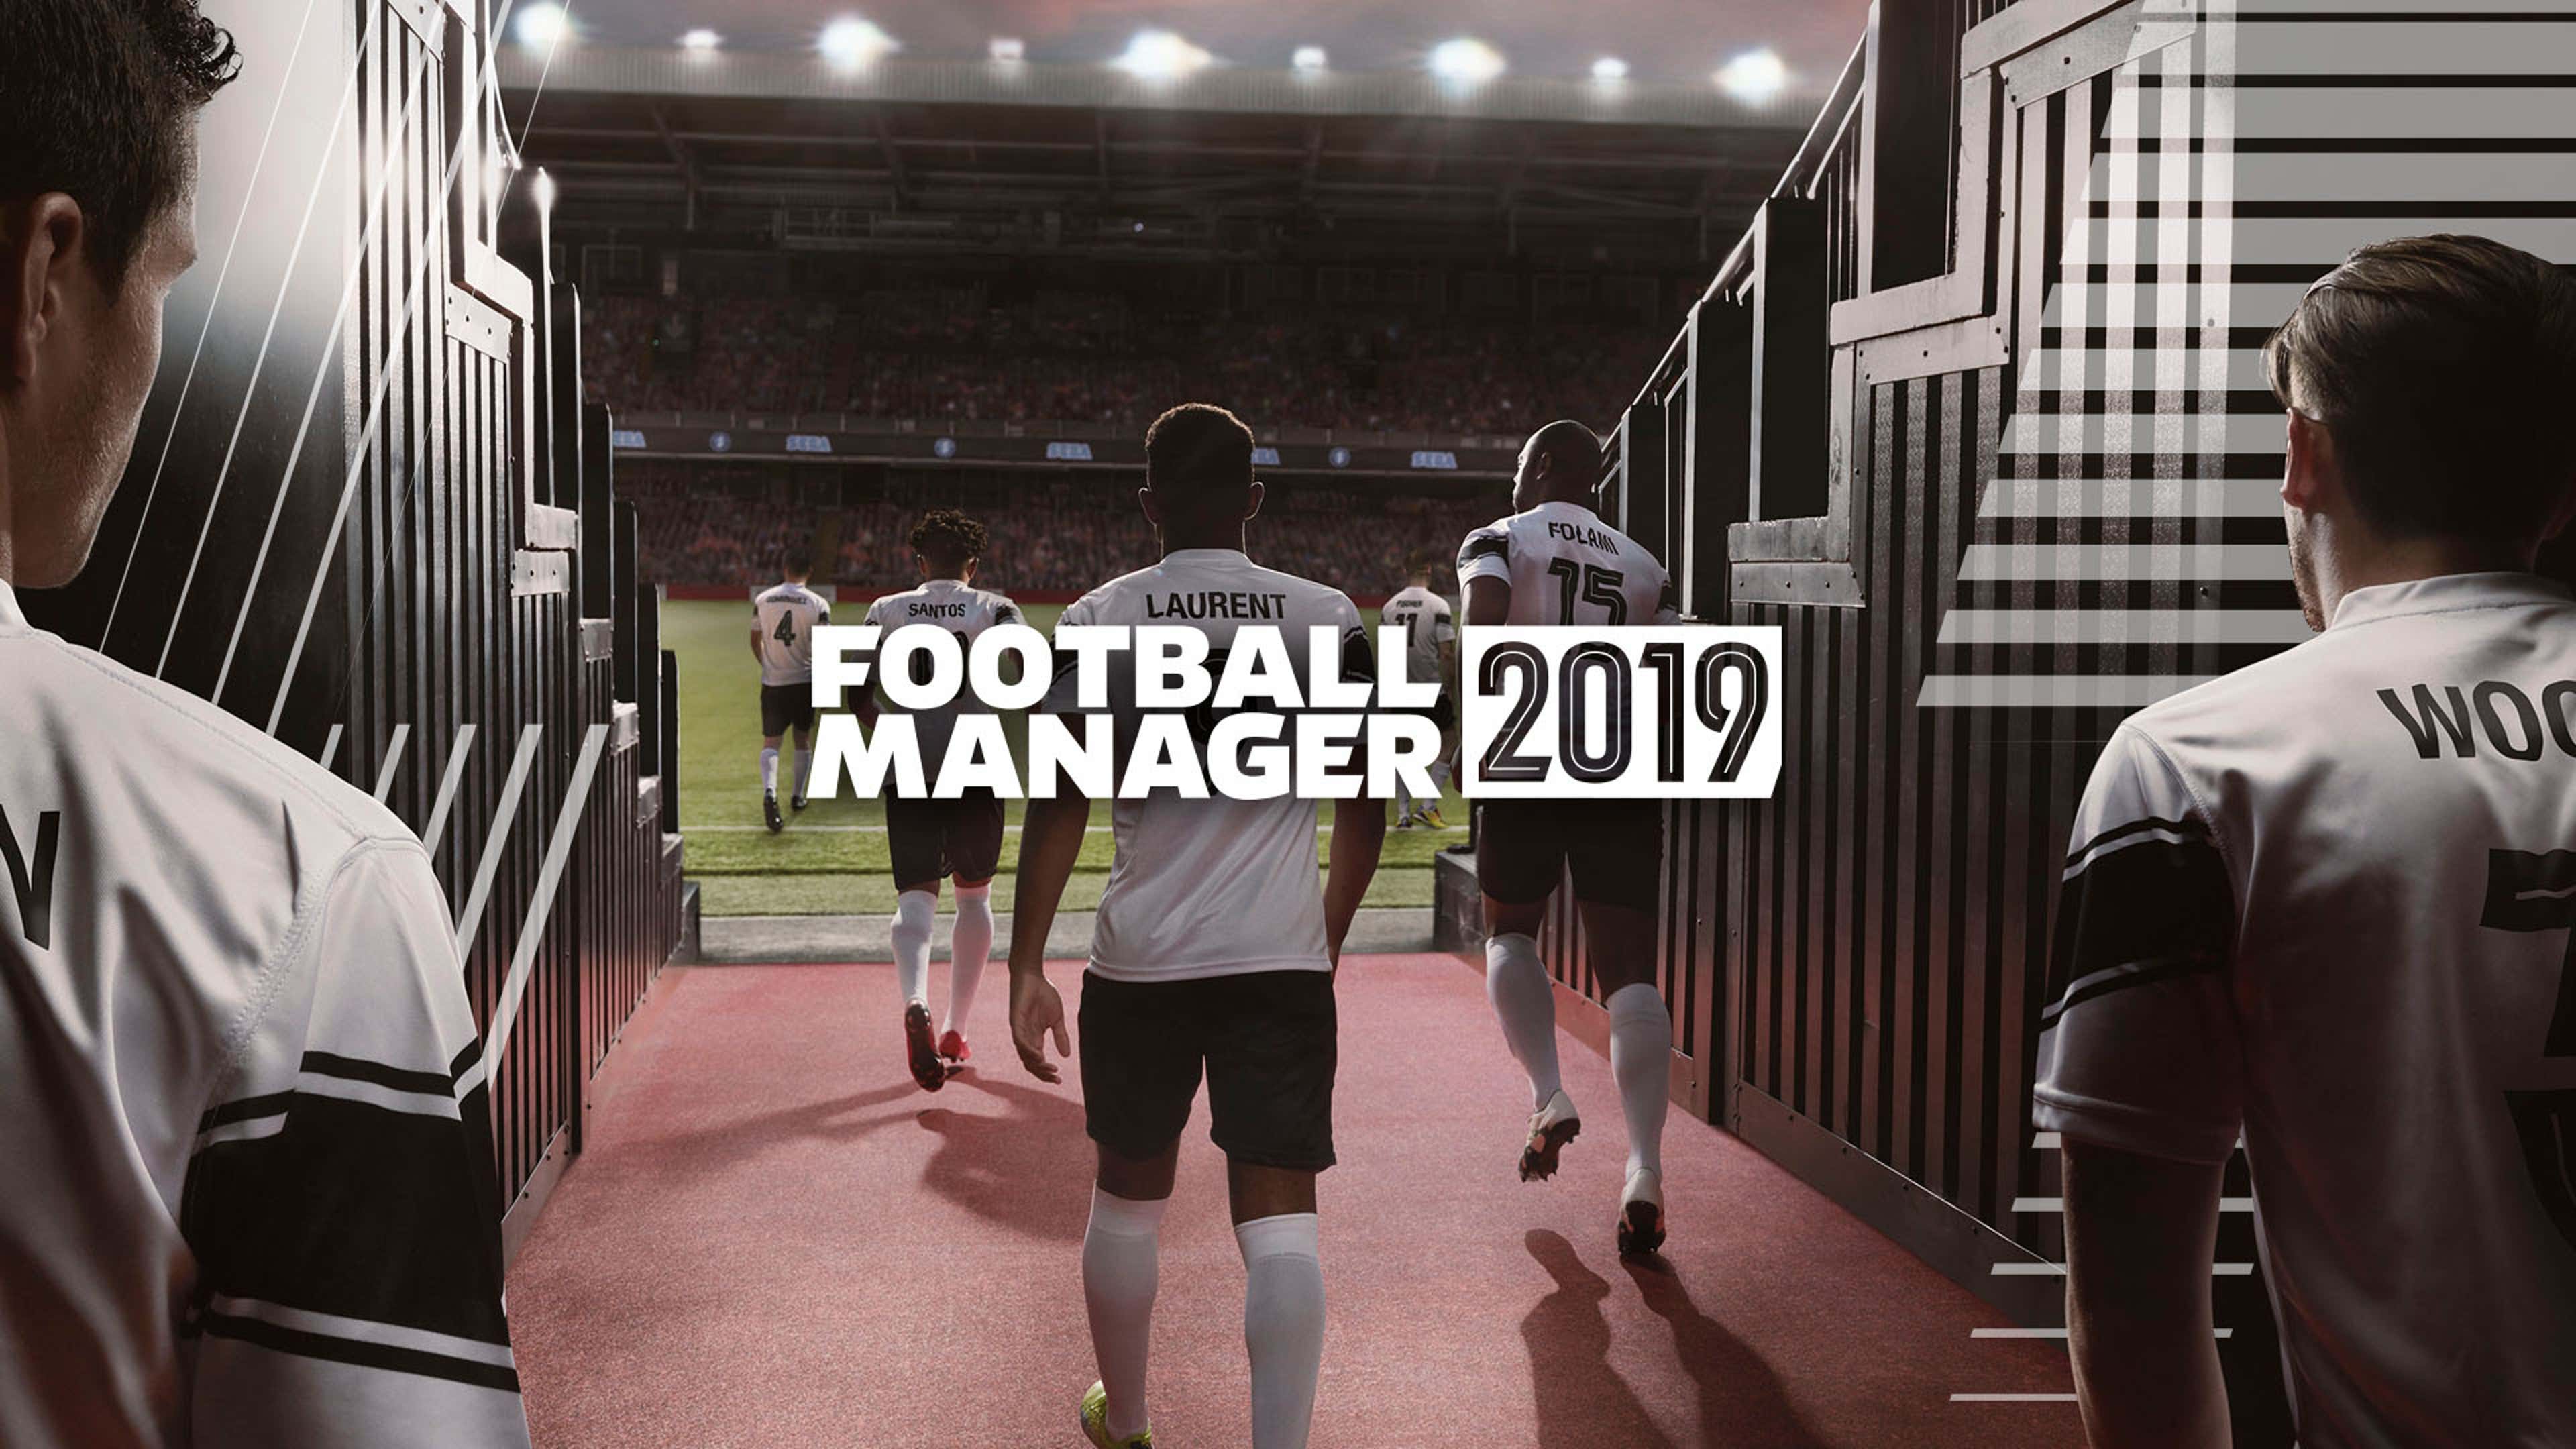 Football Manager 2022 MOBILE, Full Gameplay & New Features Review !!